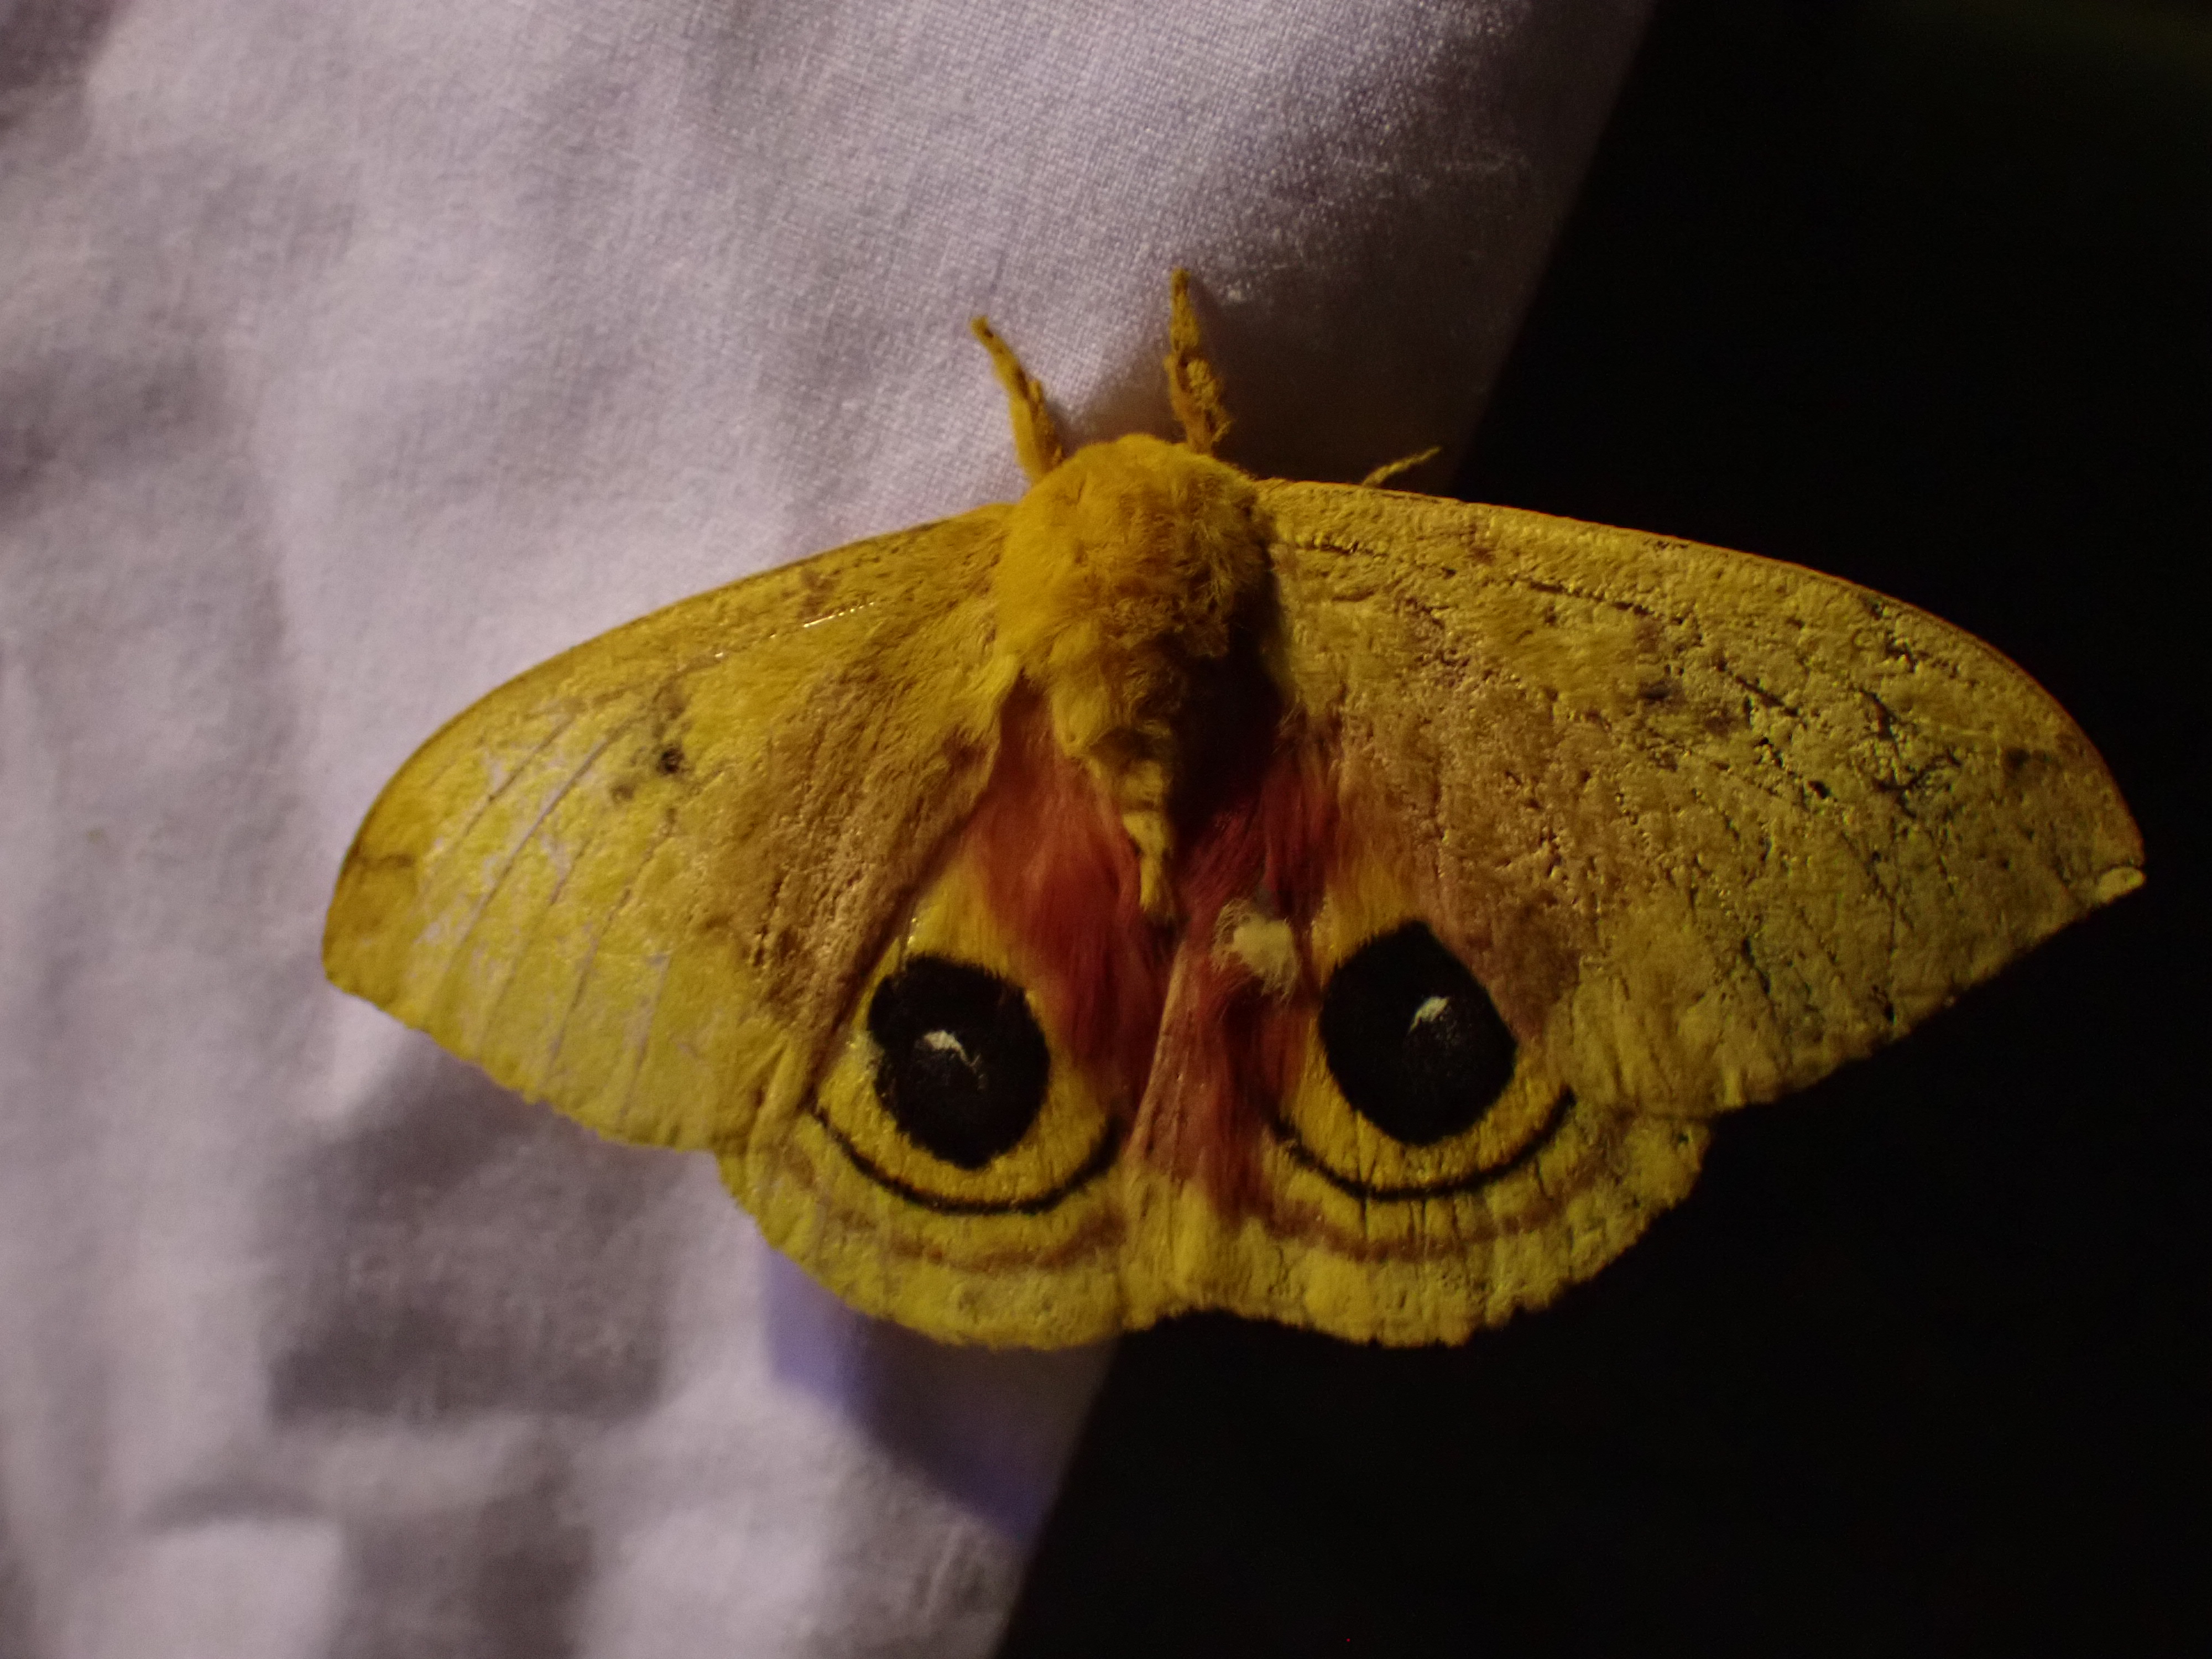 an io moth with yellow wings and eyespots, with its wings spread out, on a white sheet